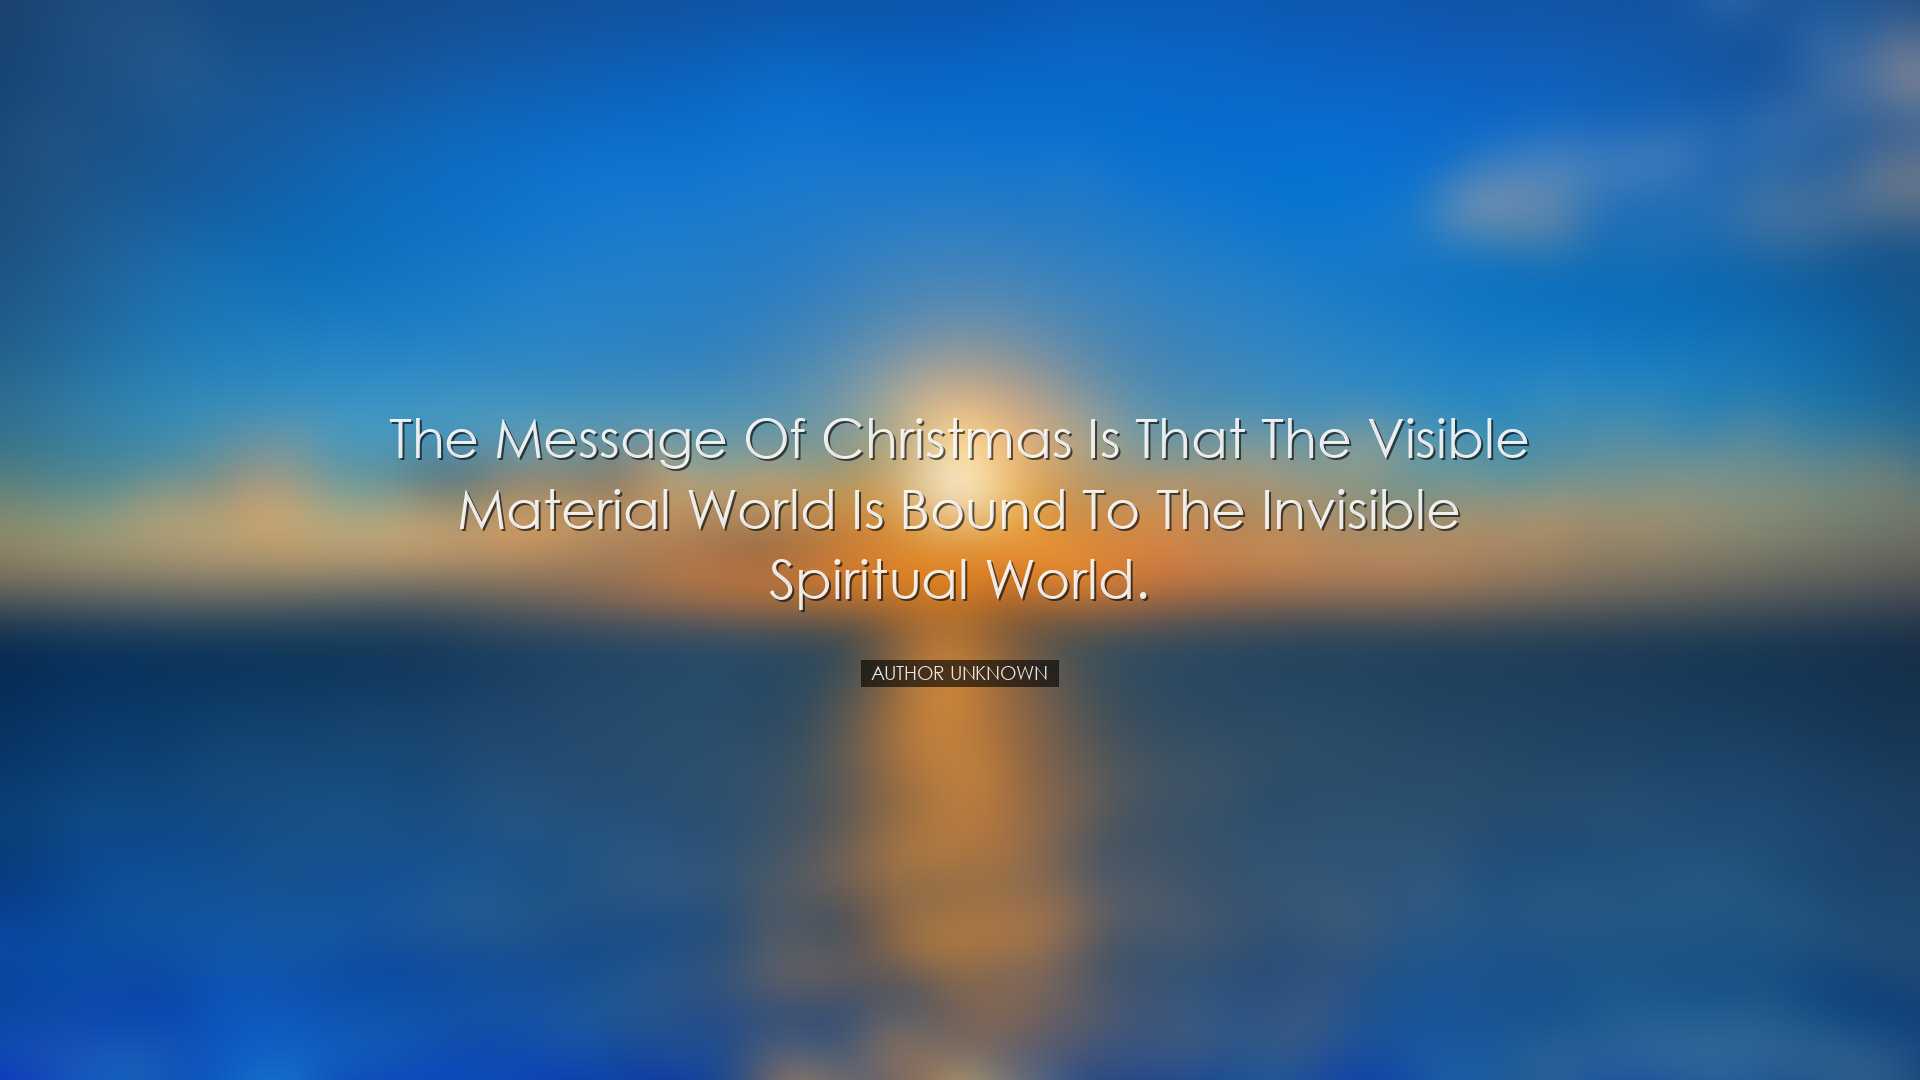 The message of Christmas is that the visible material world is bou